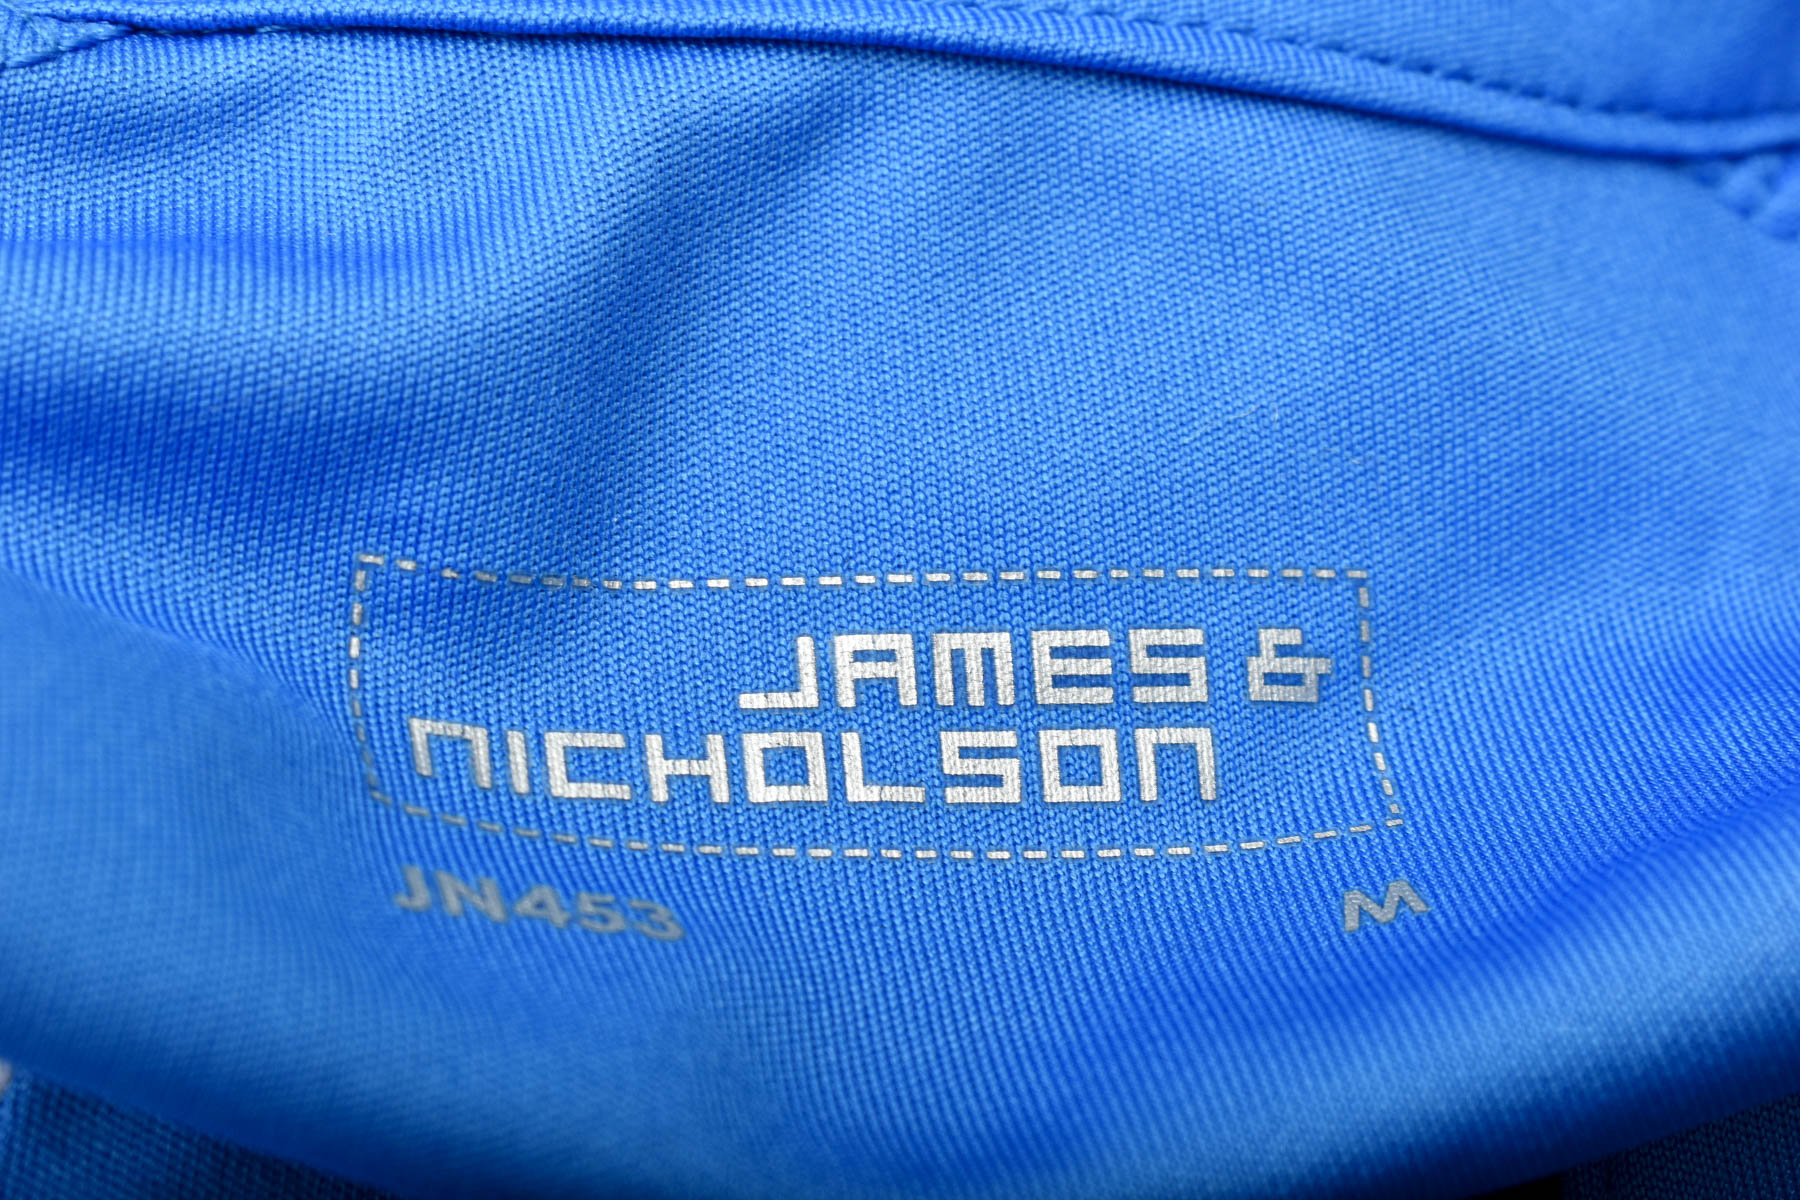 Female sports top for cycling - James & Nicholson - 2